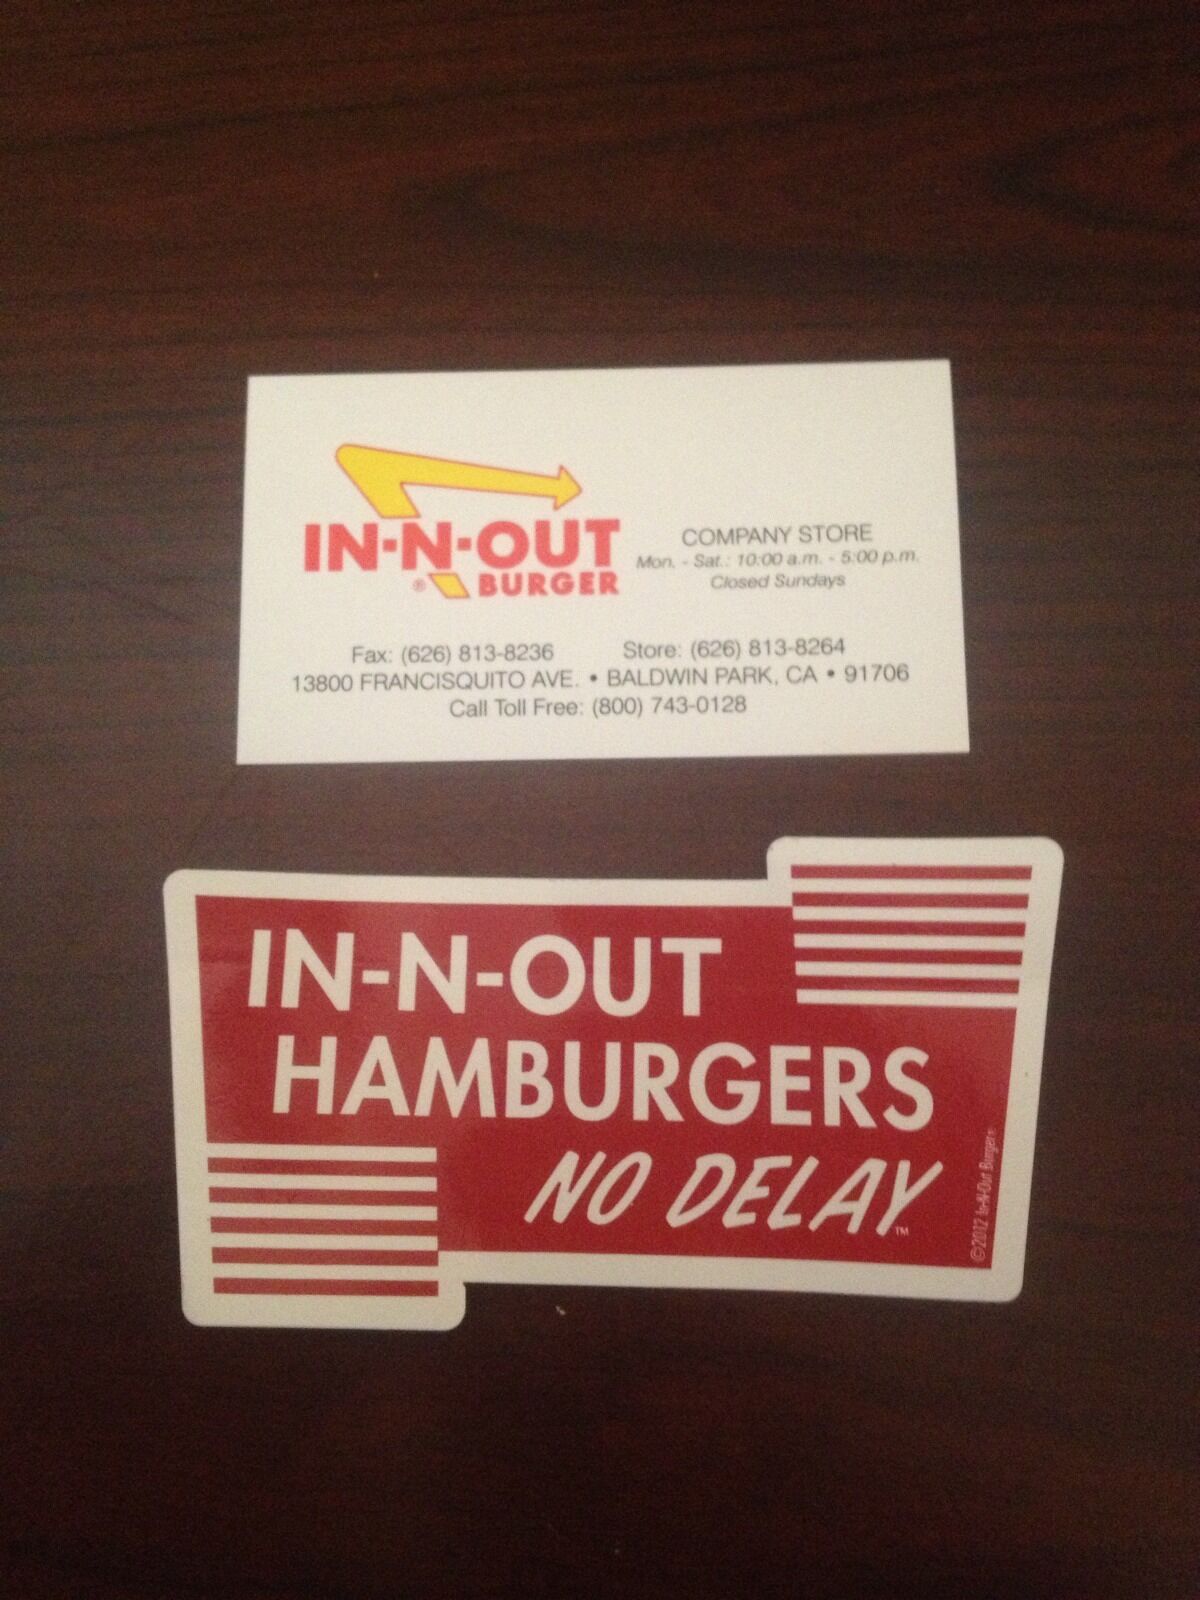 In-N-Out Company Store Business Card And Sticker - In N Out Double Double Burger